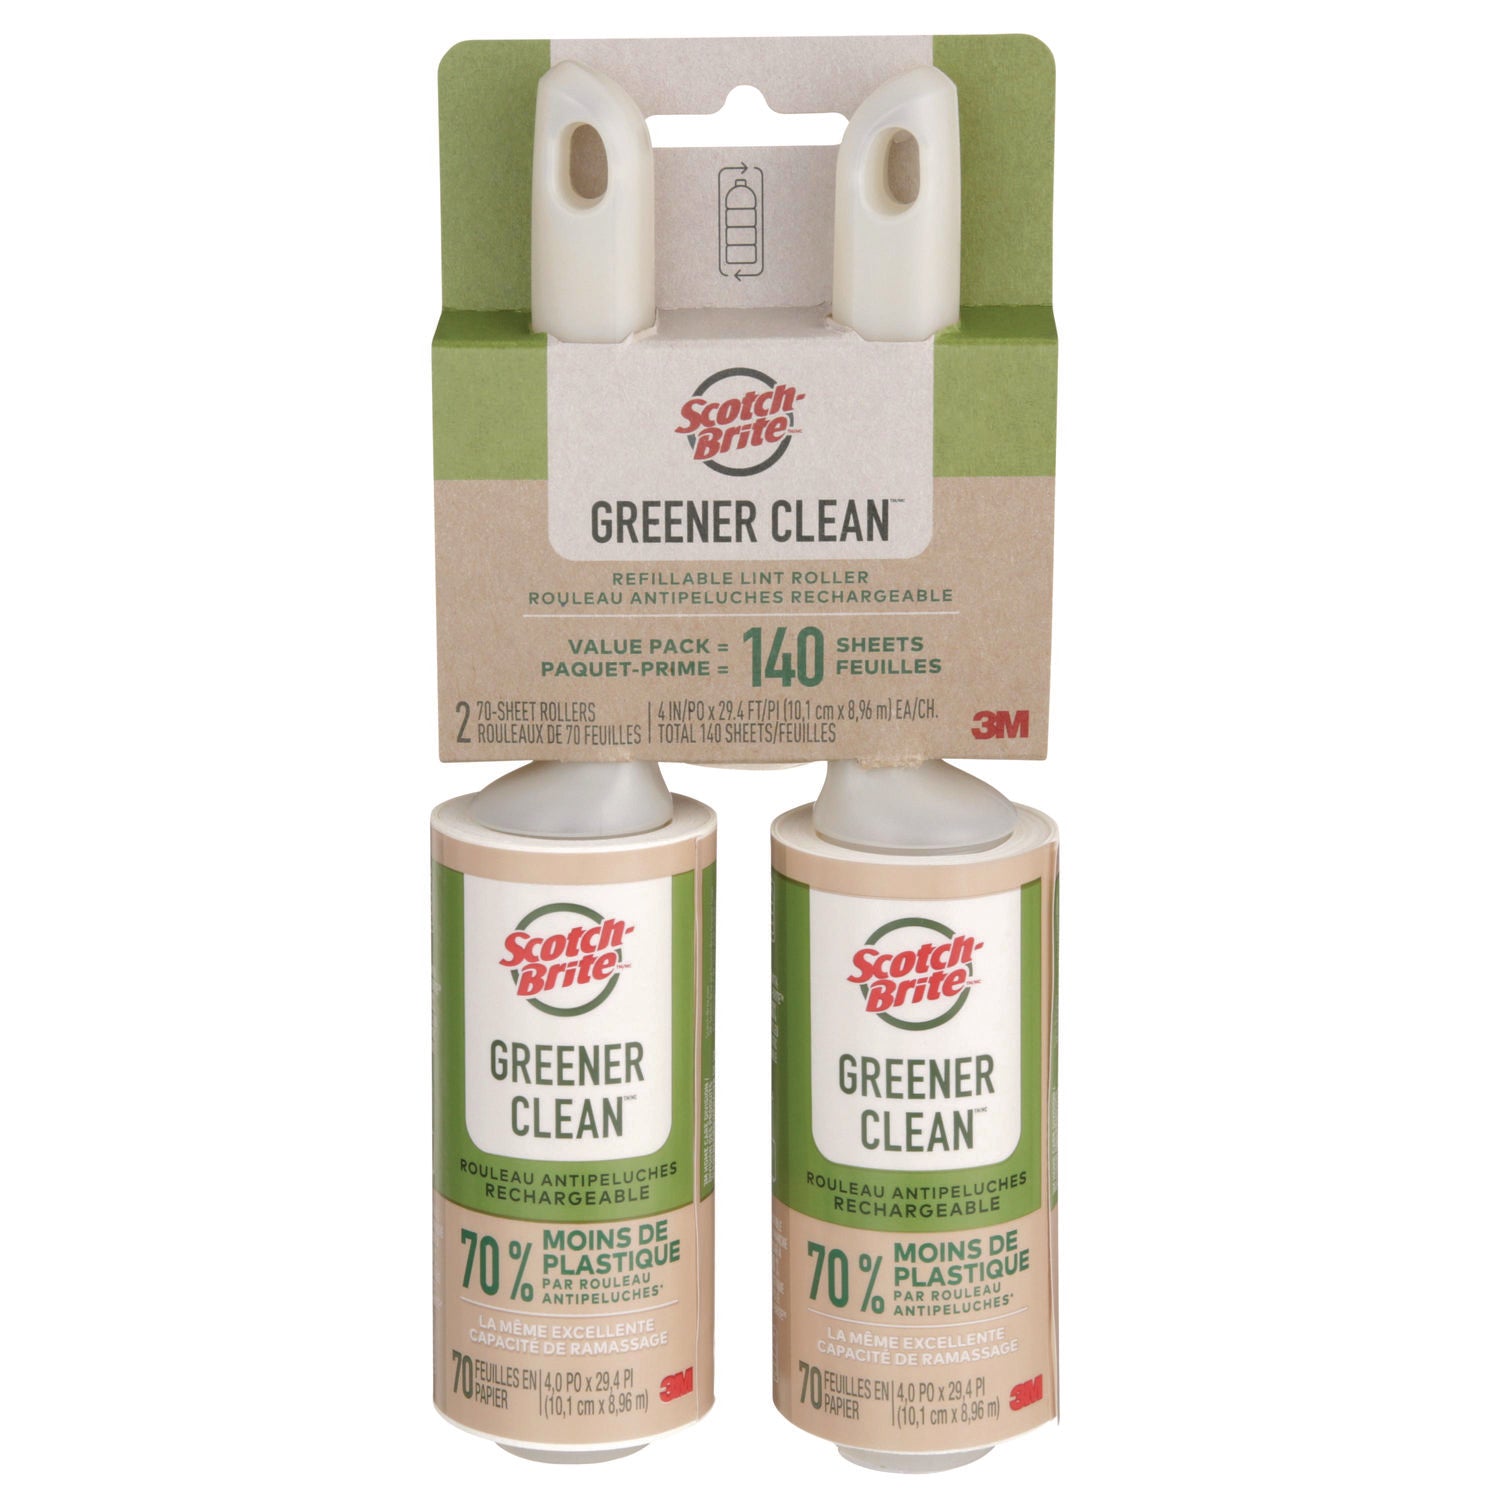 greener-clean-lint-roller-4-x-294-ft-70-sheets-roll-2-pack_mmm841rs70tp - 1